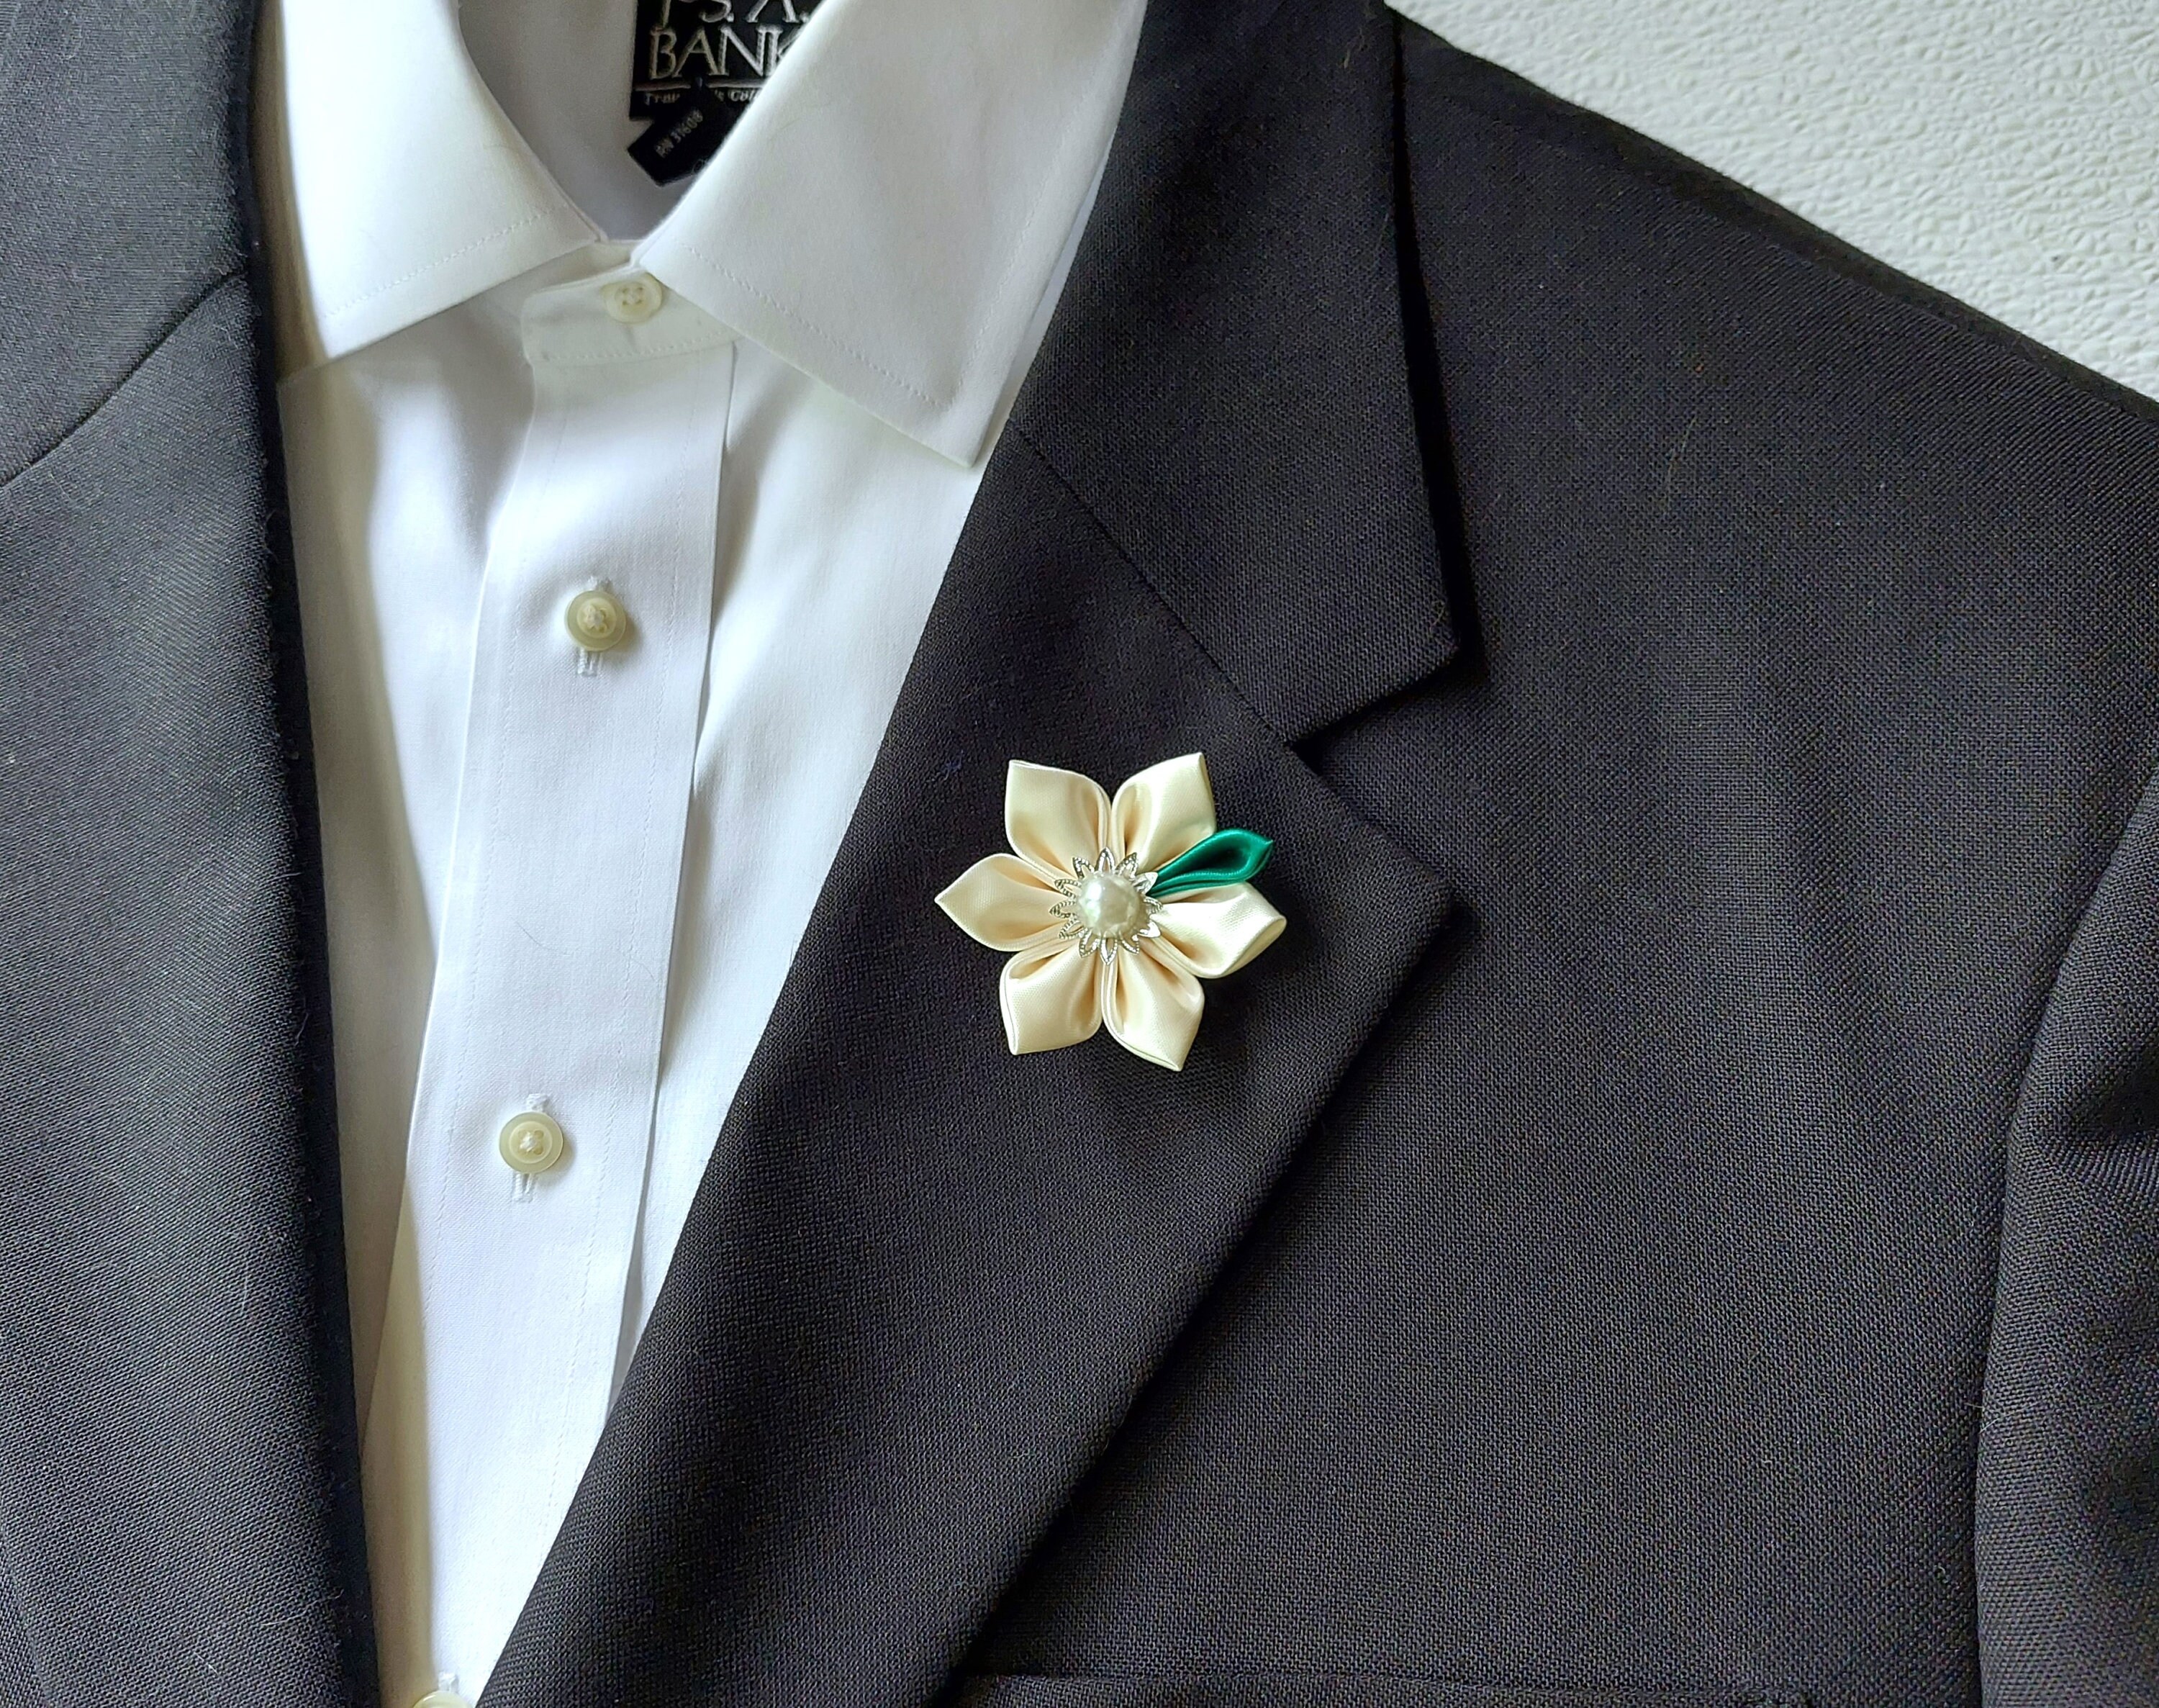 Flower Enamel Pin - Lapel Pin - Flower Pin - Flower Brooch - Best Friend  Gift - Gifts for her - Gifts under 15 - Hennel Paper Co. - PIN28